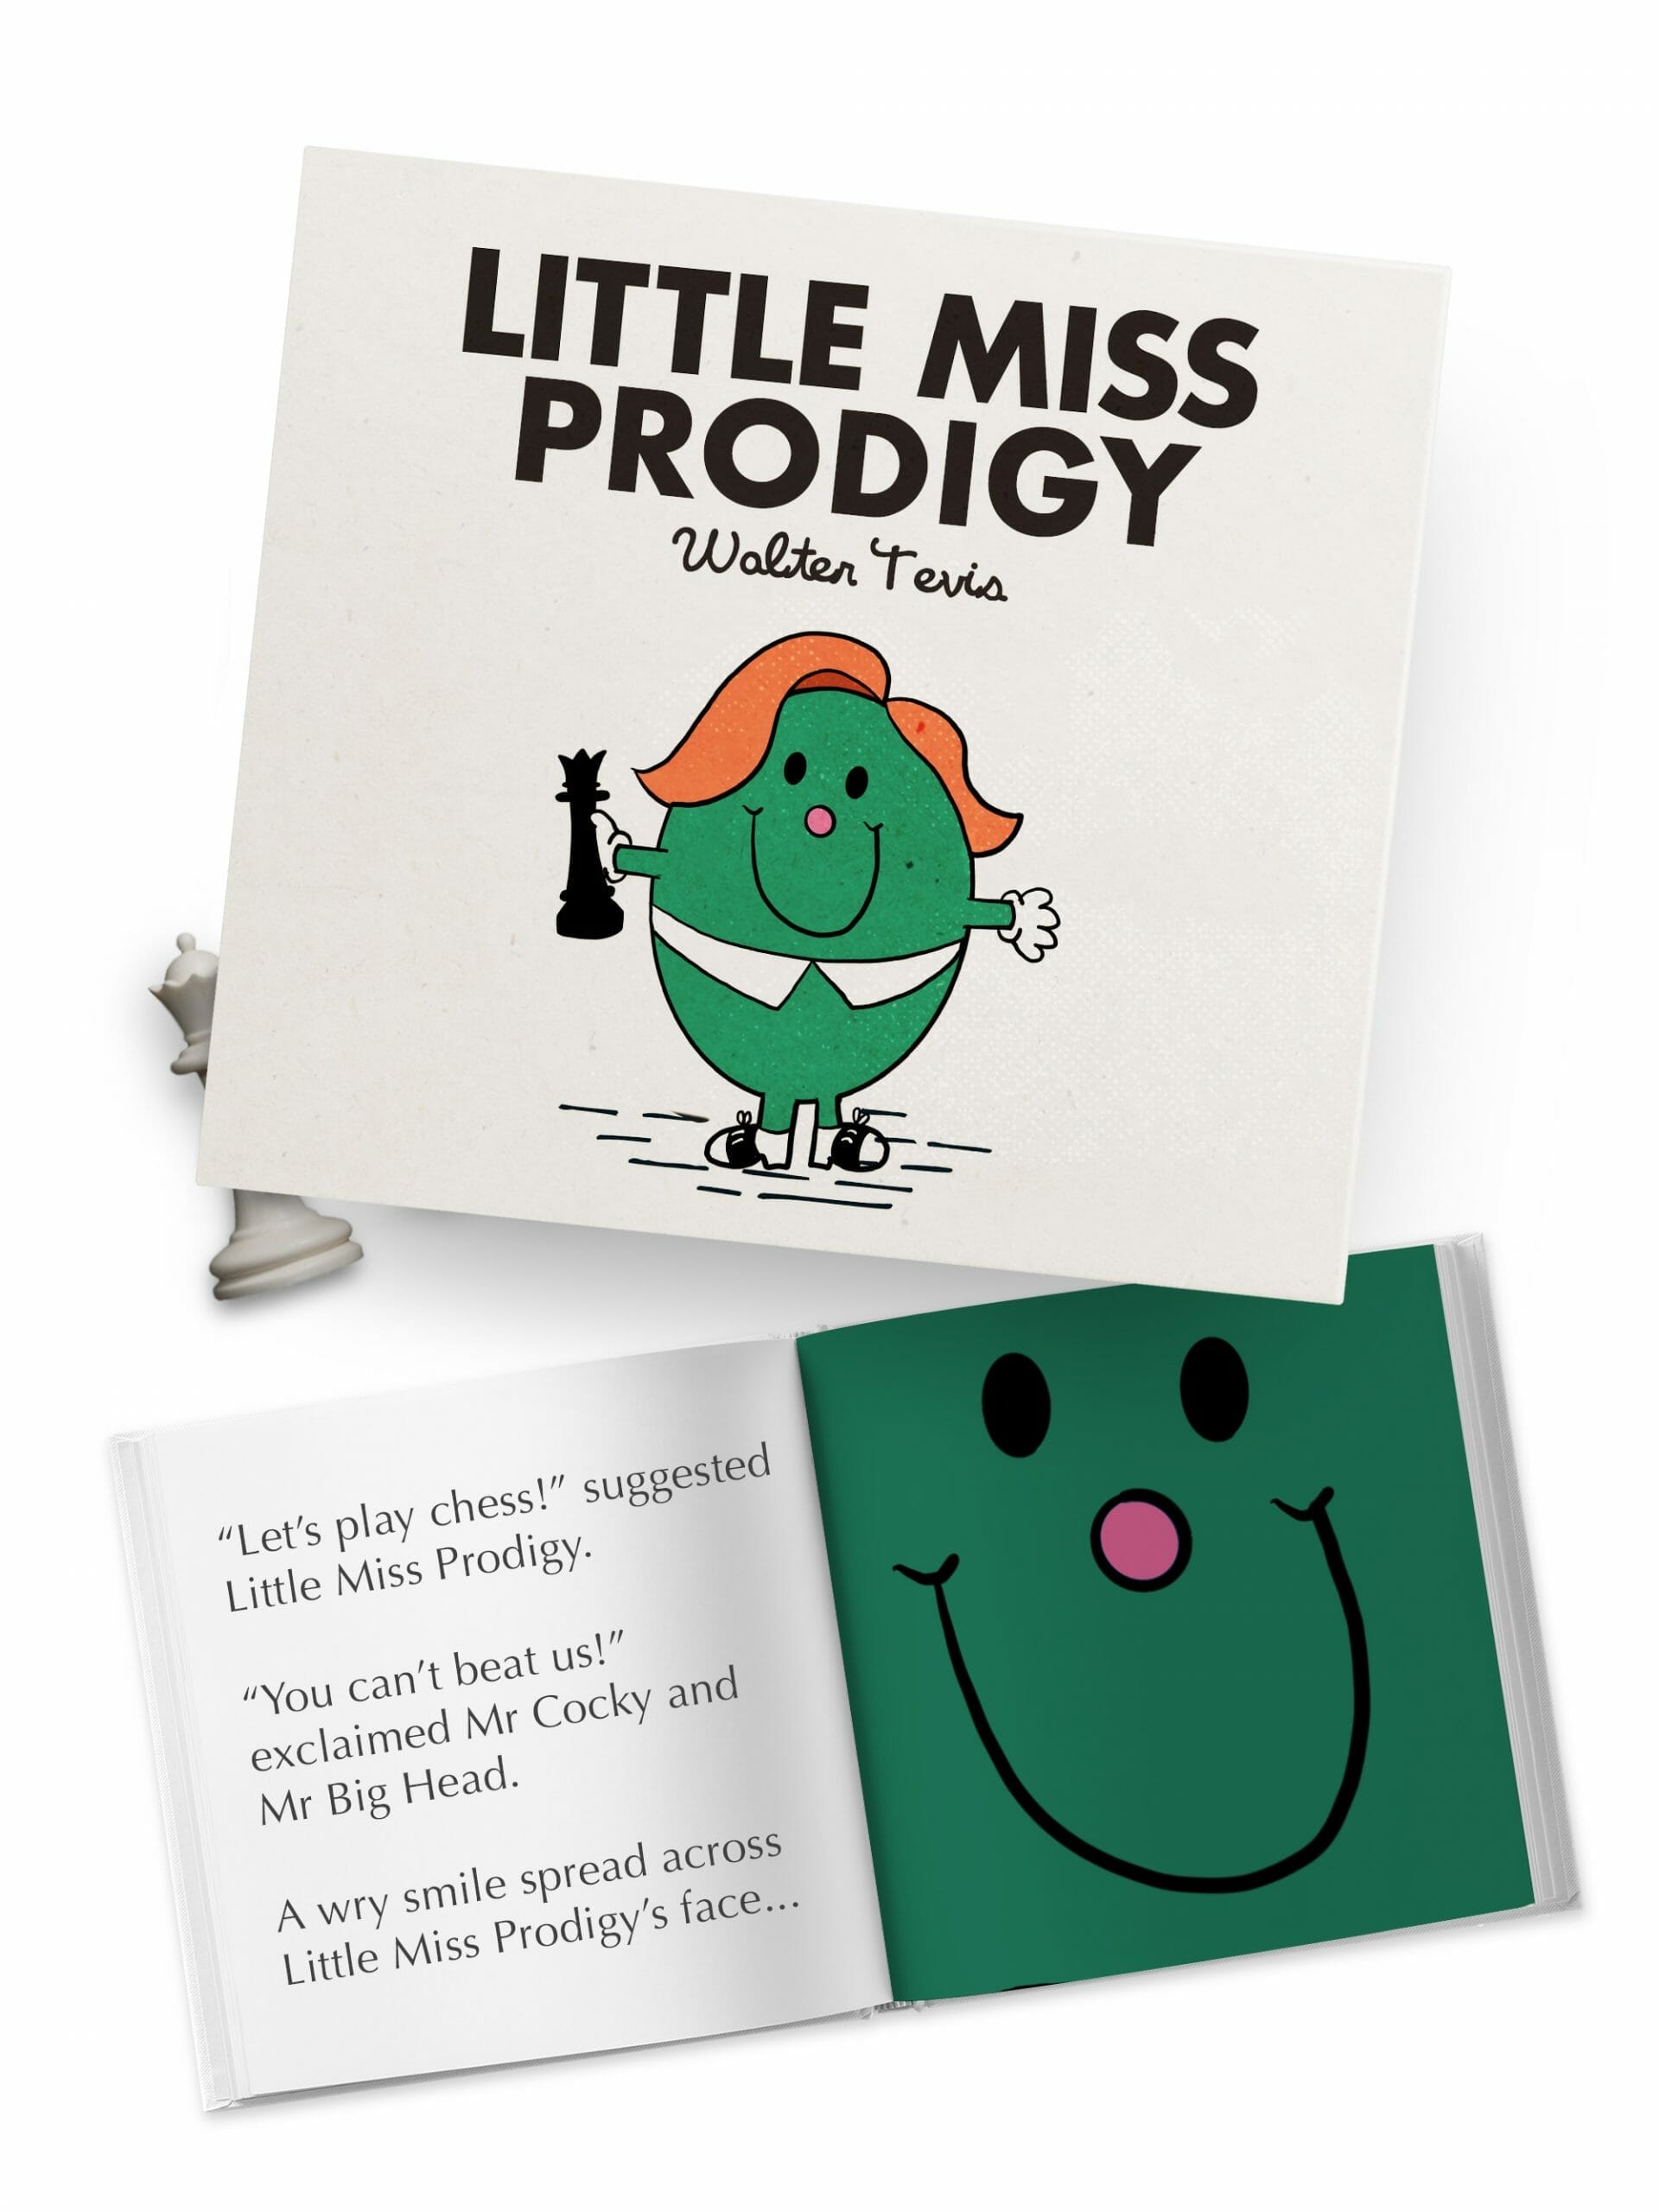 Little Miss Prodigy (The Queen's Gambit)